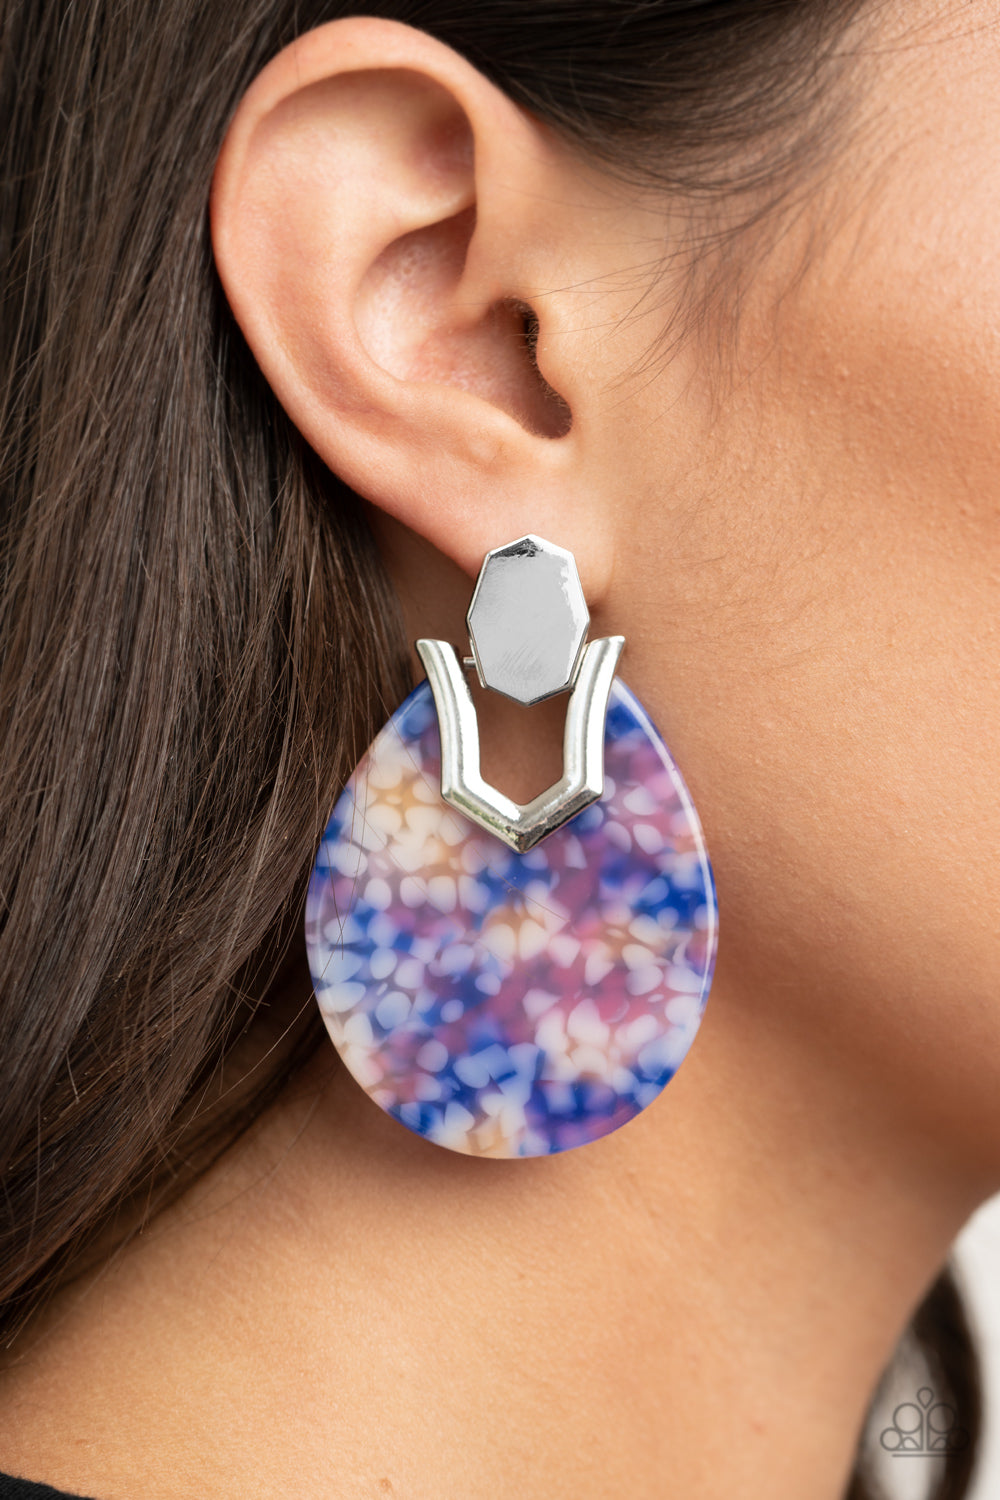 HAUTE Flash Blue Earring - Paparazzi Accessories Speckled in a colorful watercolor pattern, a teardrop acrylic frame fastens to a shiny silver fitting for a trendy retro look. Earring attaches to a standard post fitting.  ﻿All Paparazzi Accessories are lead free and nickel free!  Sold as one pair of post earrings.